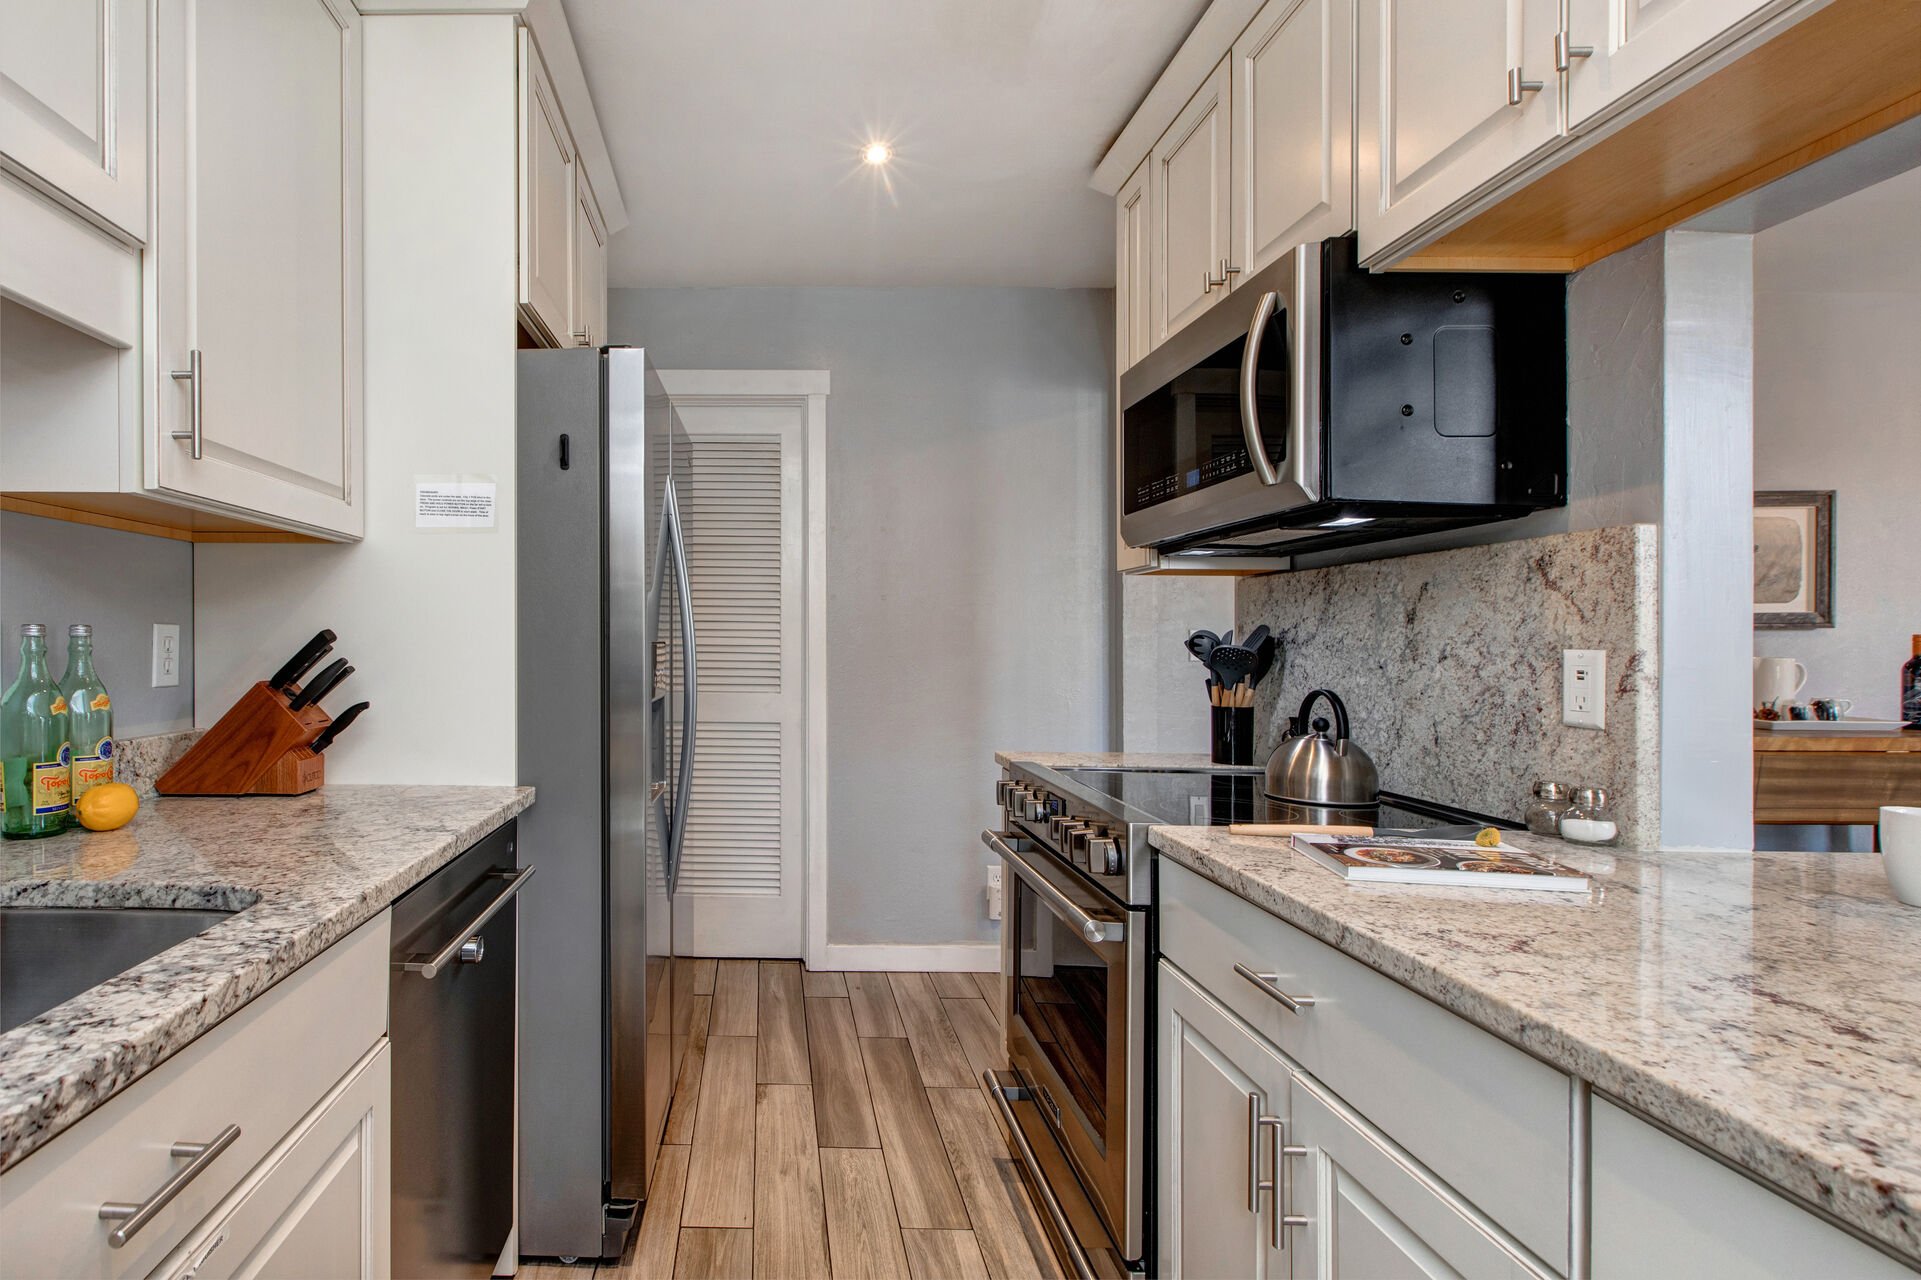 Stainless Appliances and Granite Counters